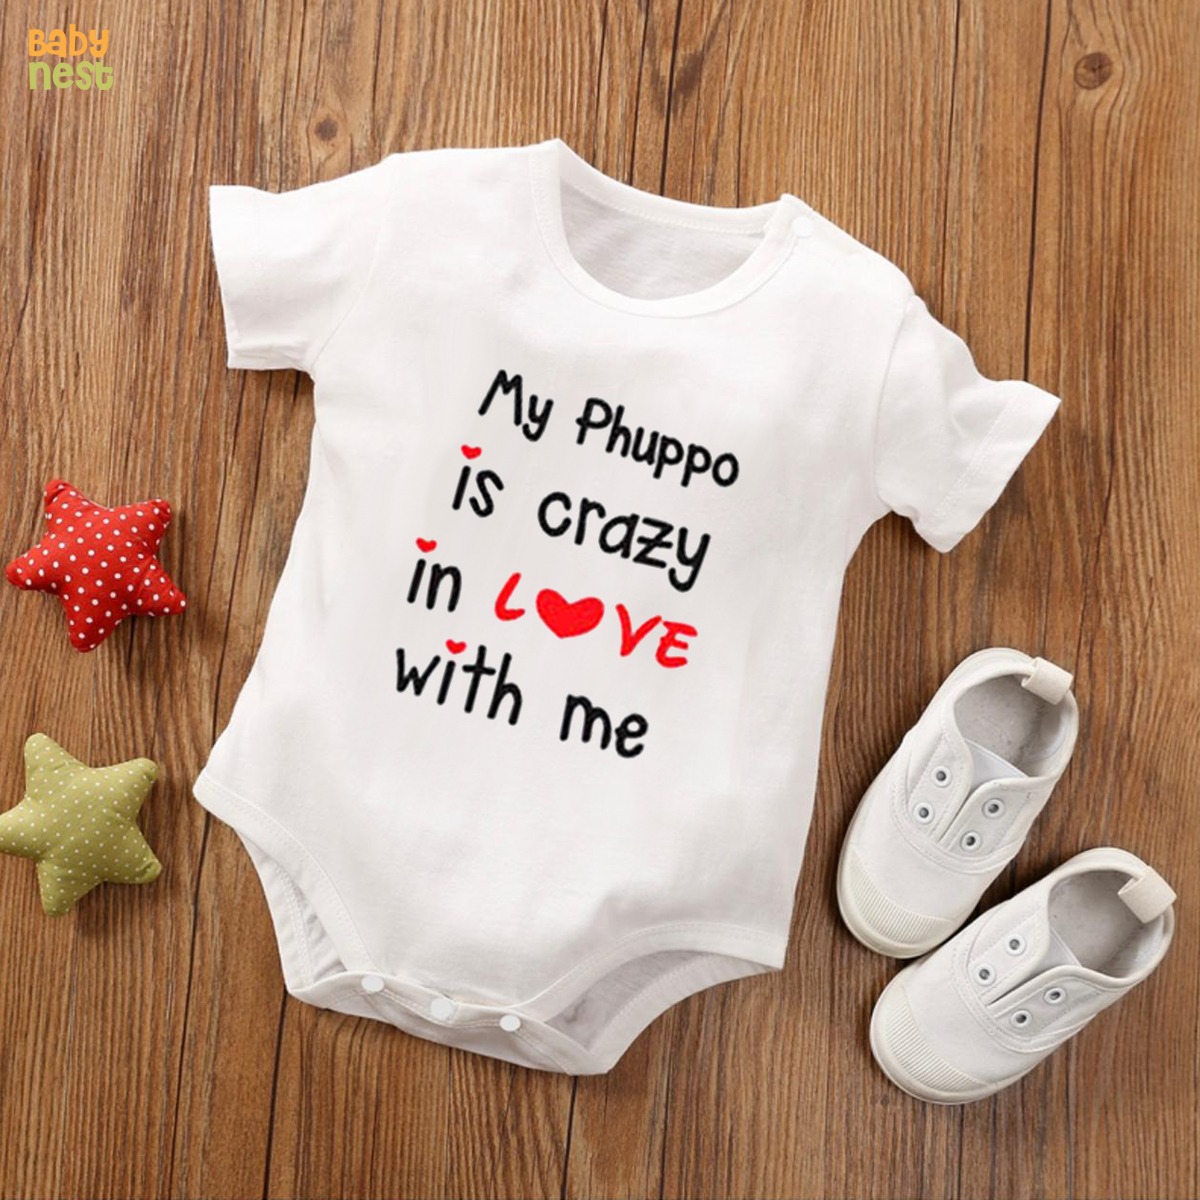 My Phuppo is Crazy in Love With Me - (White) RBT 139 Romper For Kids